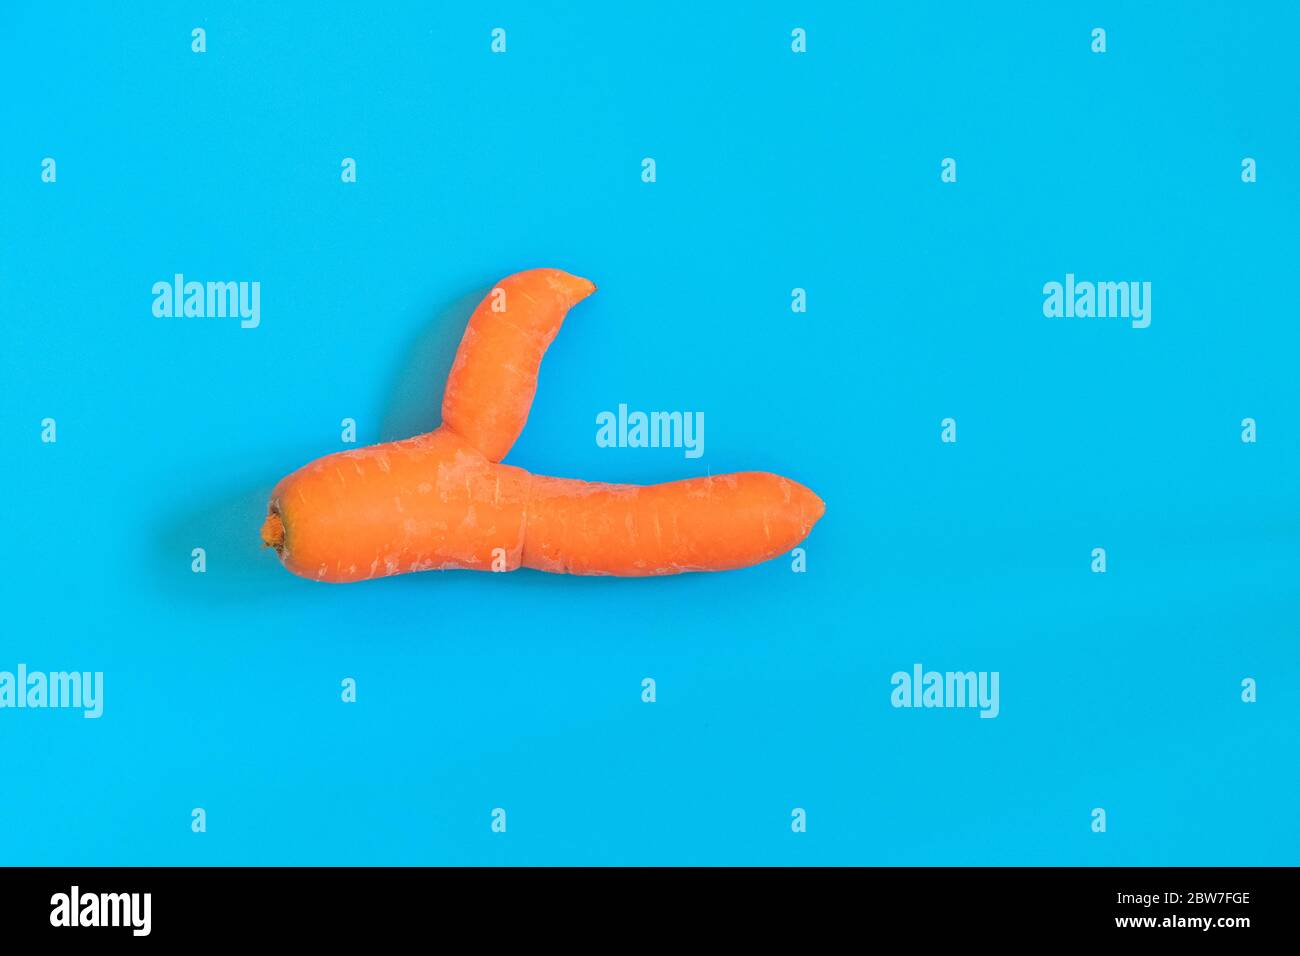 Ugly carrot on blue background shows thumbs up in support of food waste reduce trend. Image with copy space, top view Stock Photo